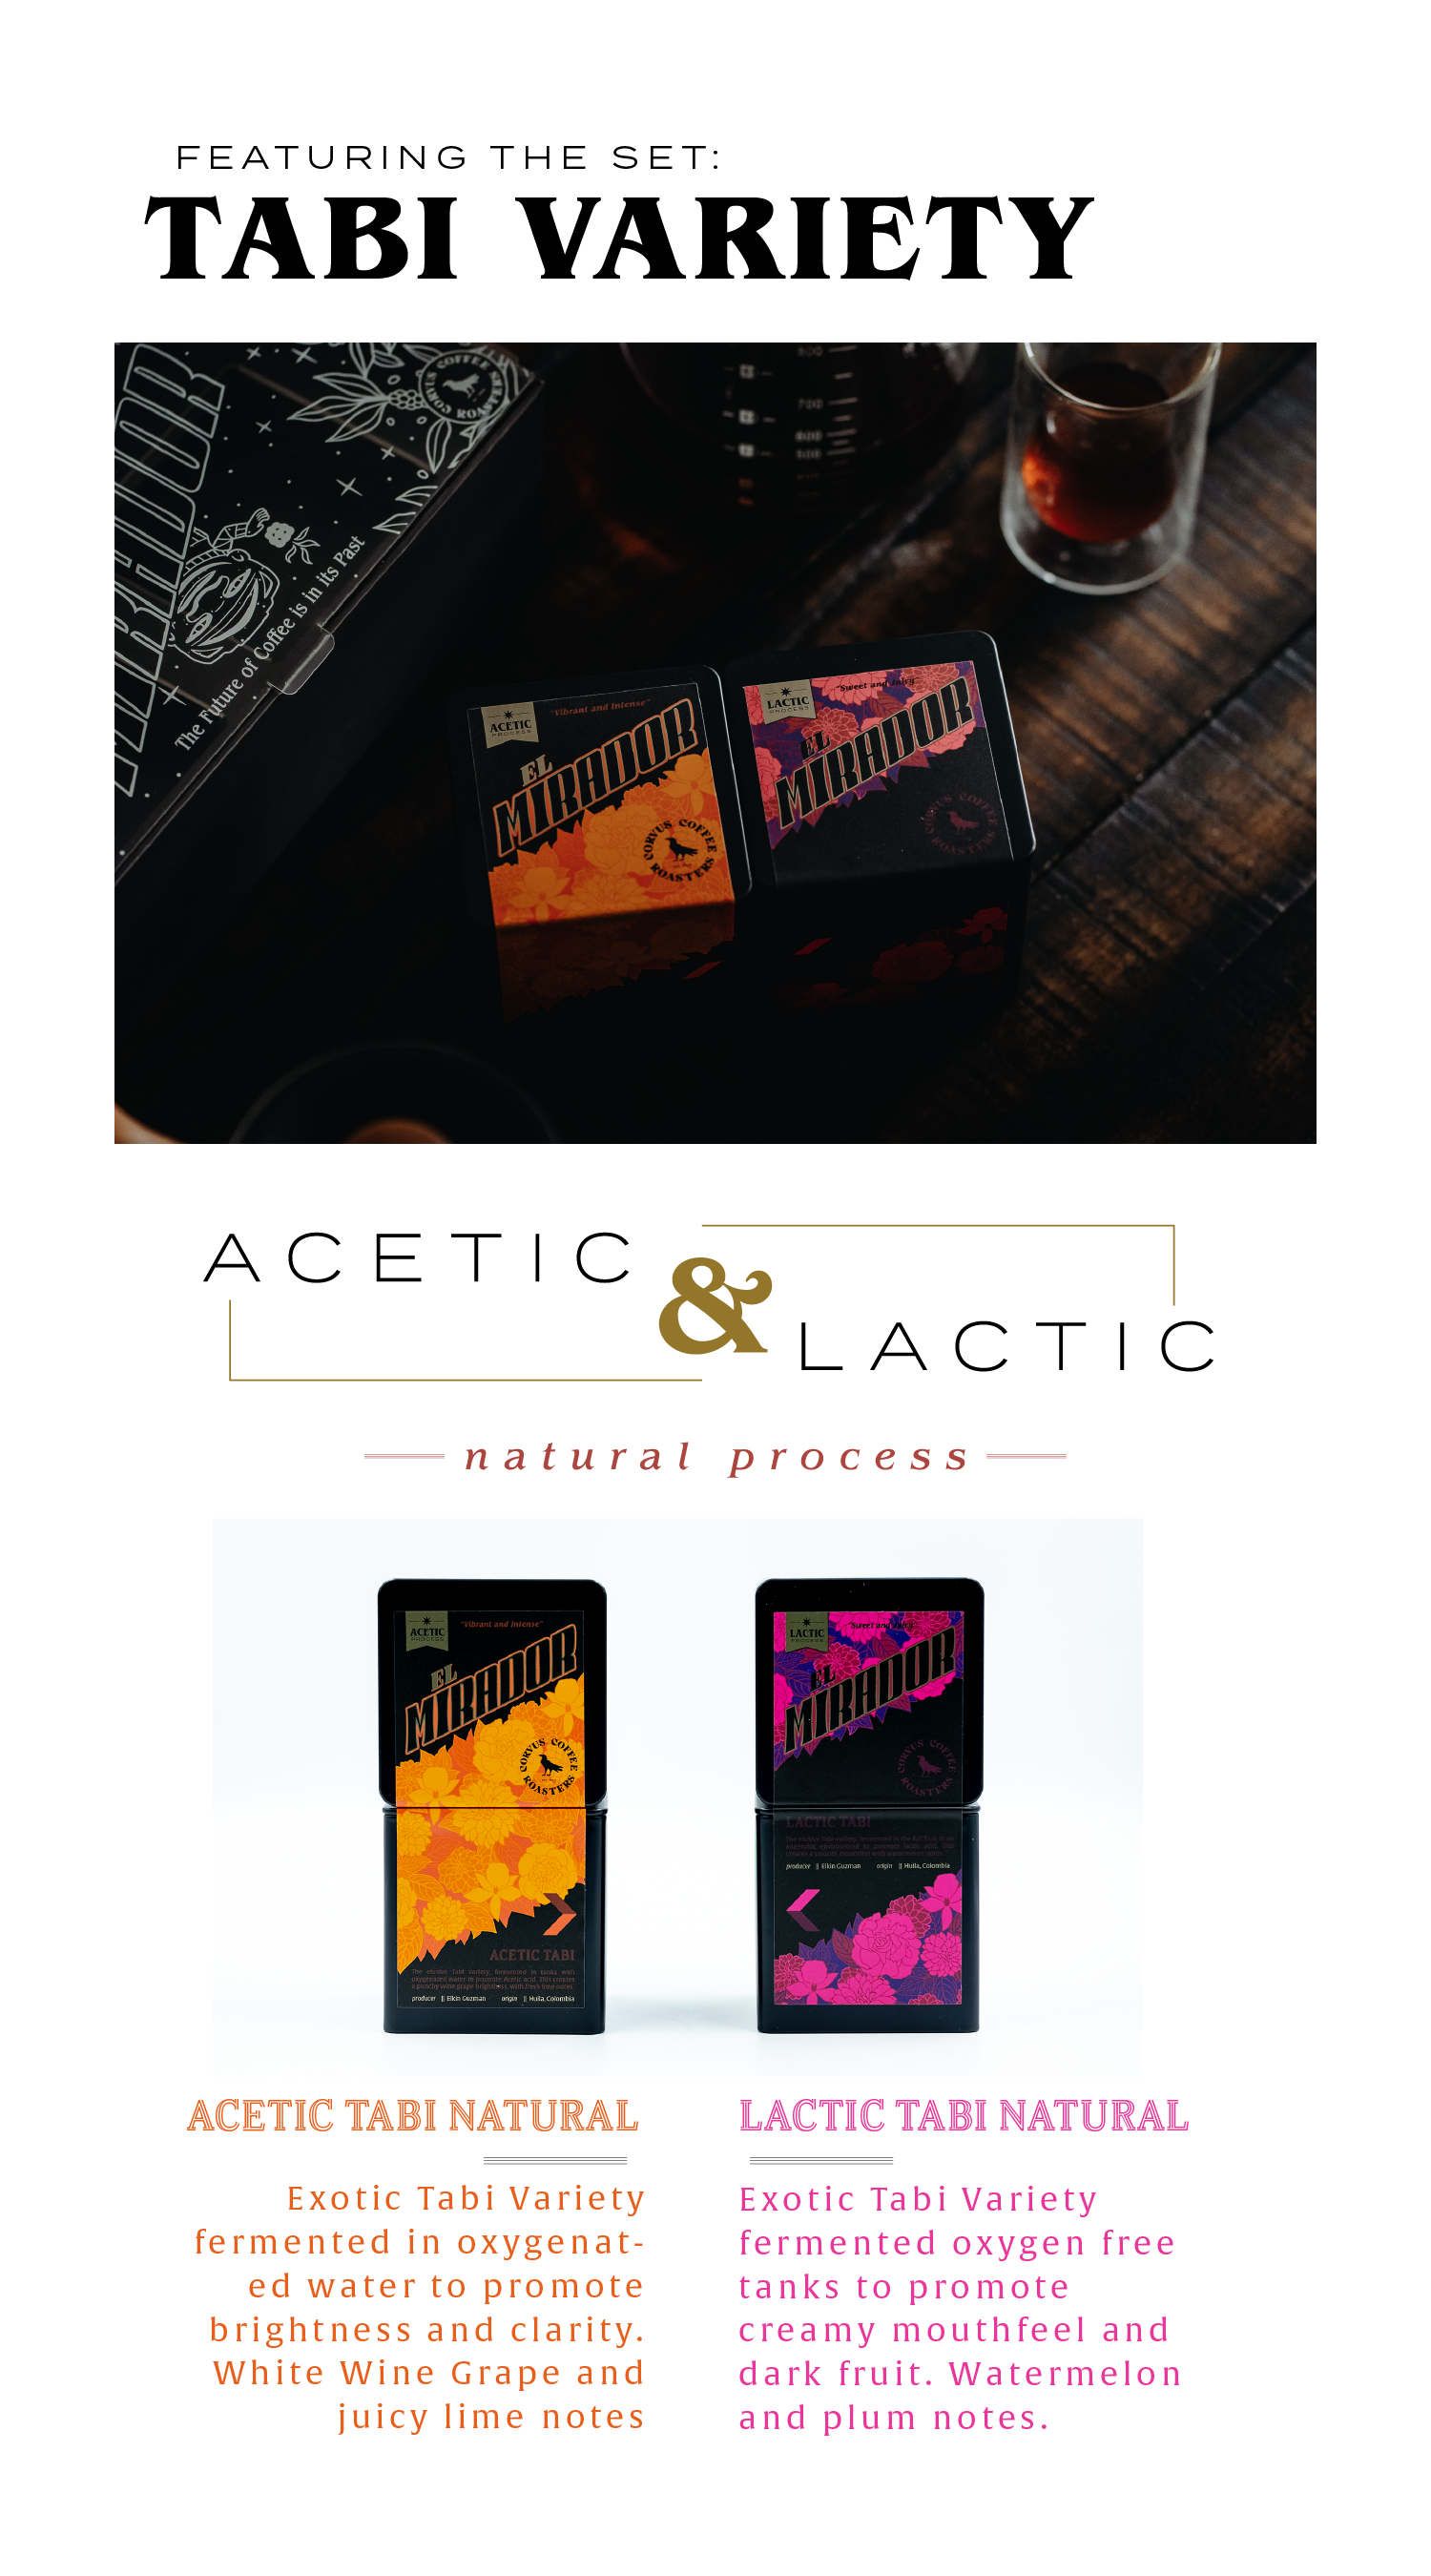 Acetic tabi: Exotic Tabi Variety fermented in oxygenated water to promote brightness and clarity. White Wine Grape and juicy lime notes. Lactic Tabi: Exotic Tabi Variety fermented oxygen free tanks to promote creamy mouthfeel and dark fruit. Watermelon and plum notes. 